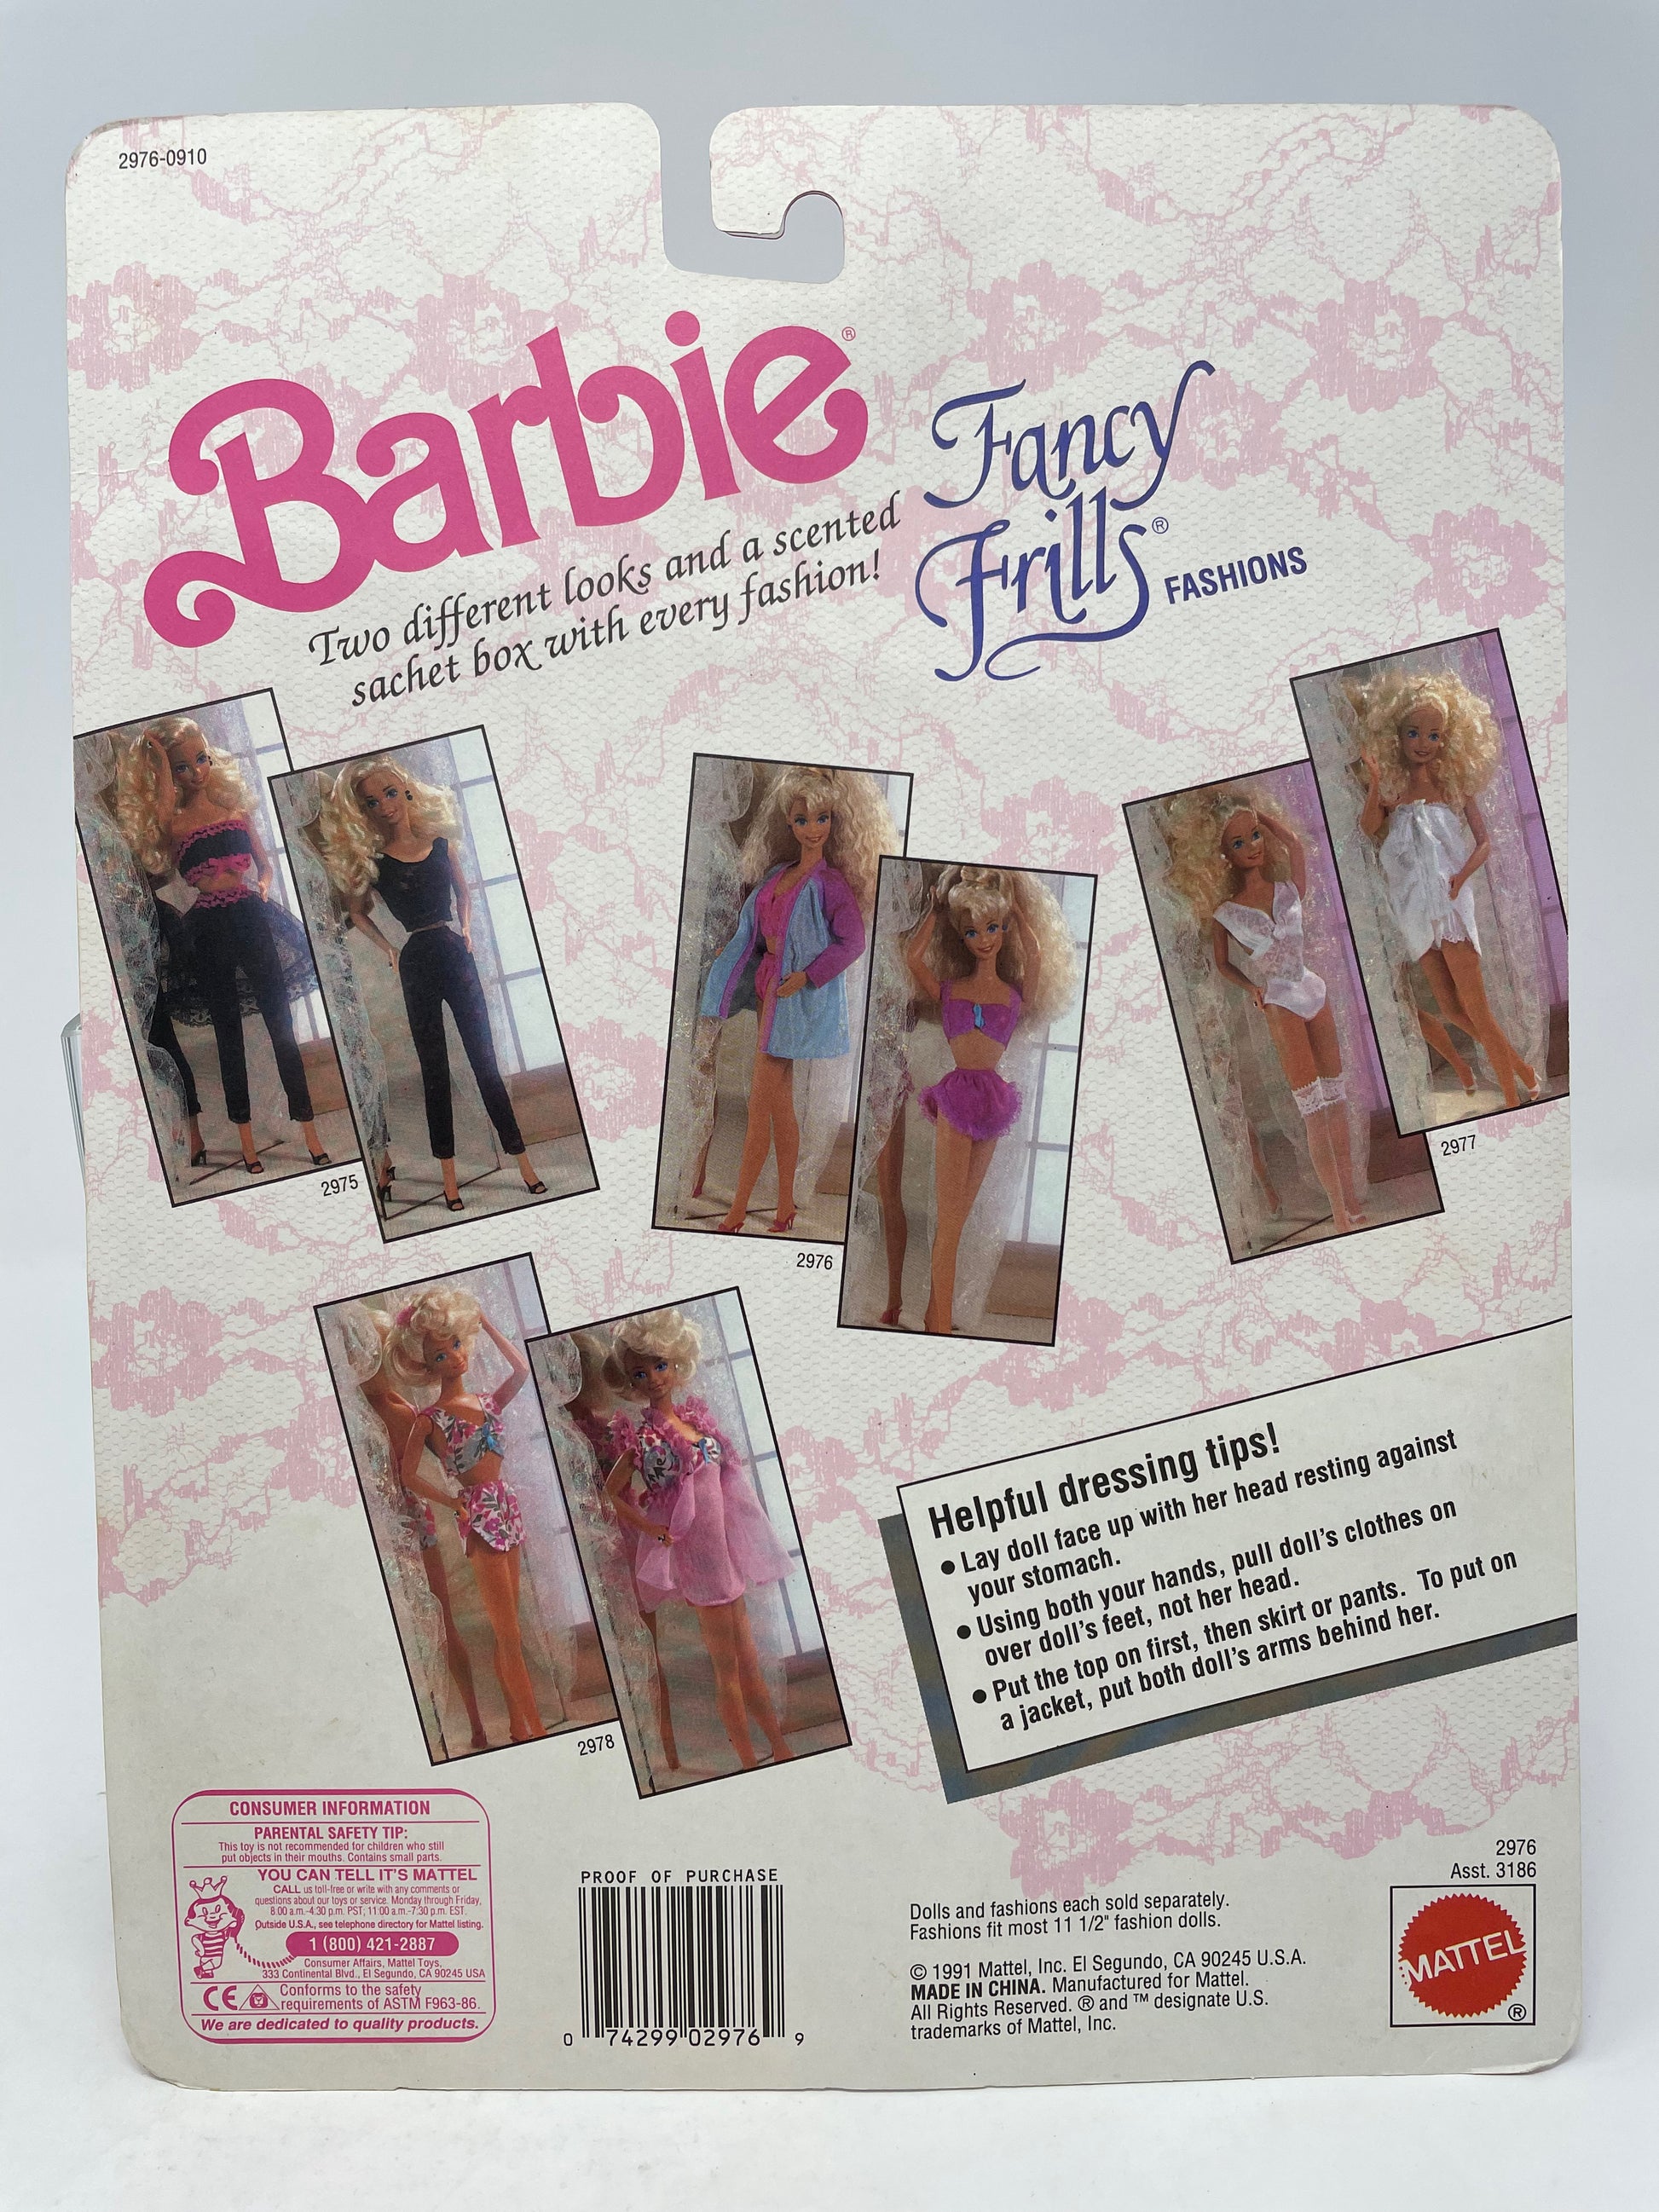 BARBIE FANCY FRILLS FASHIONS - TWO GREAT LINGERIE LOOKS - PINK